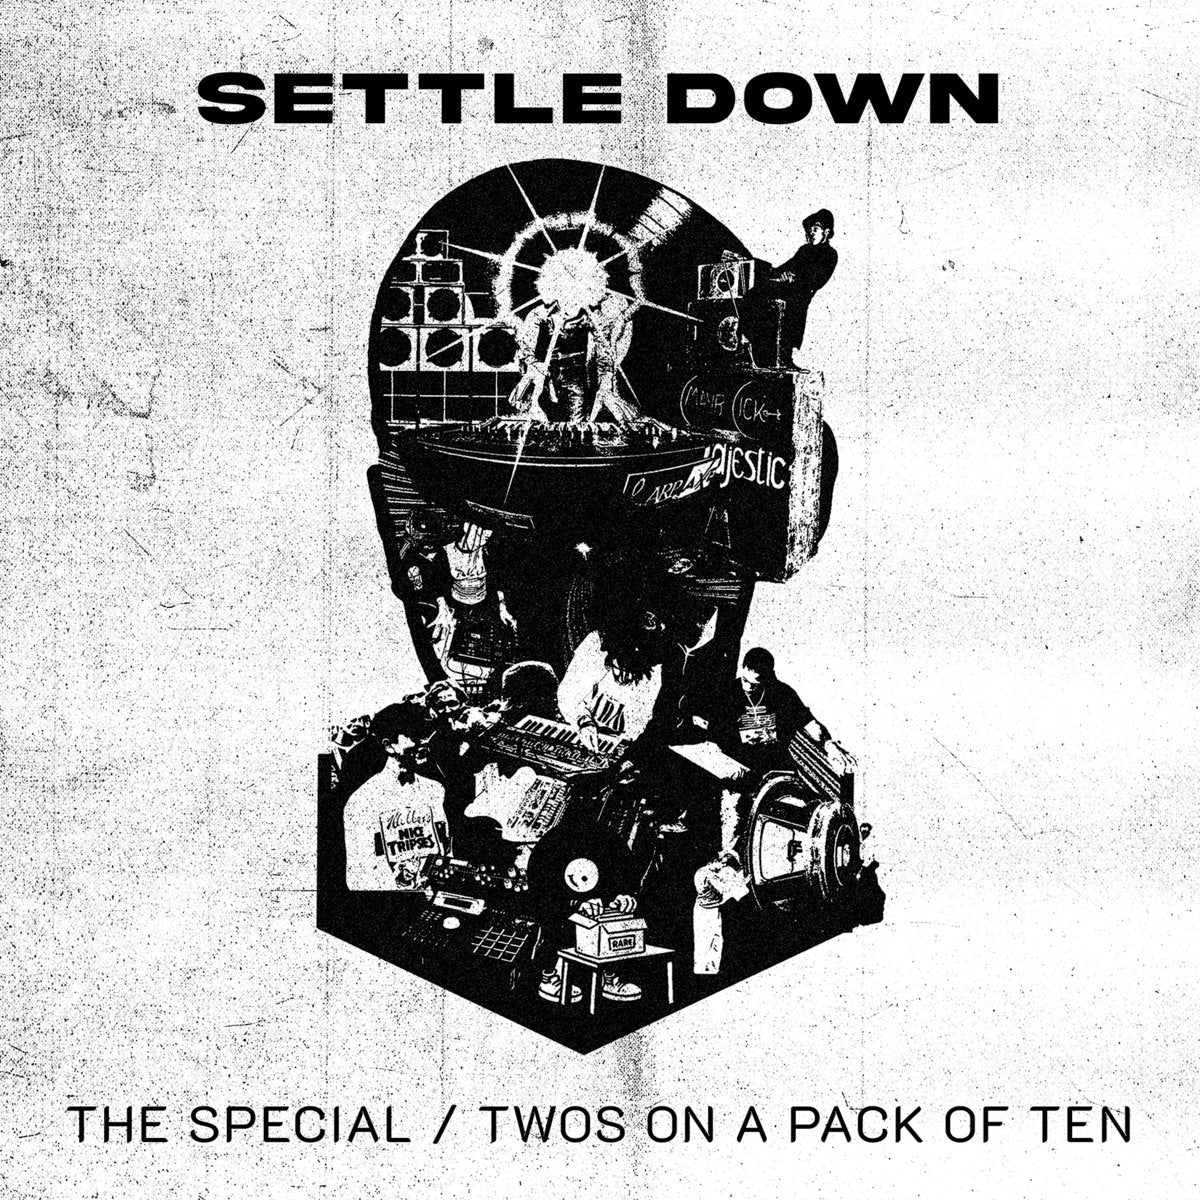 SETTLE DOWN 'THE SPECIAL / TWOS ON A PAC OF 10' 12"